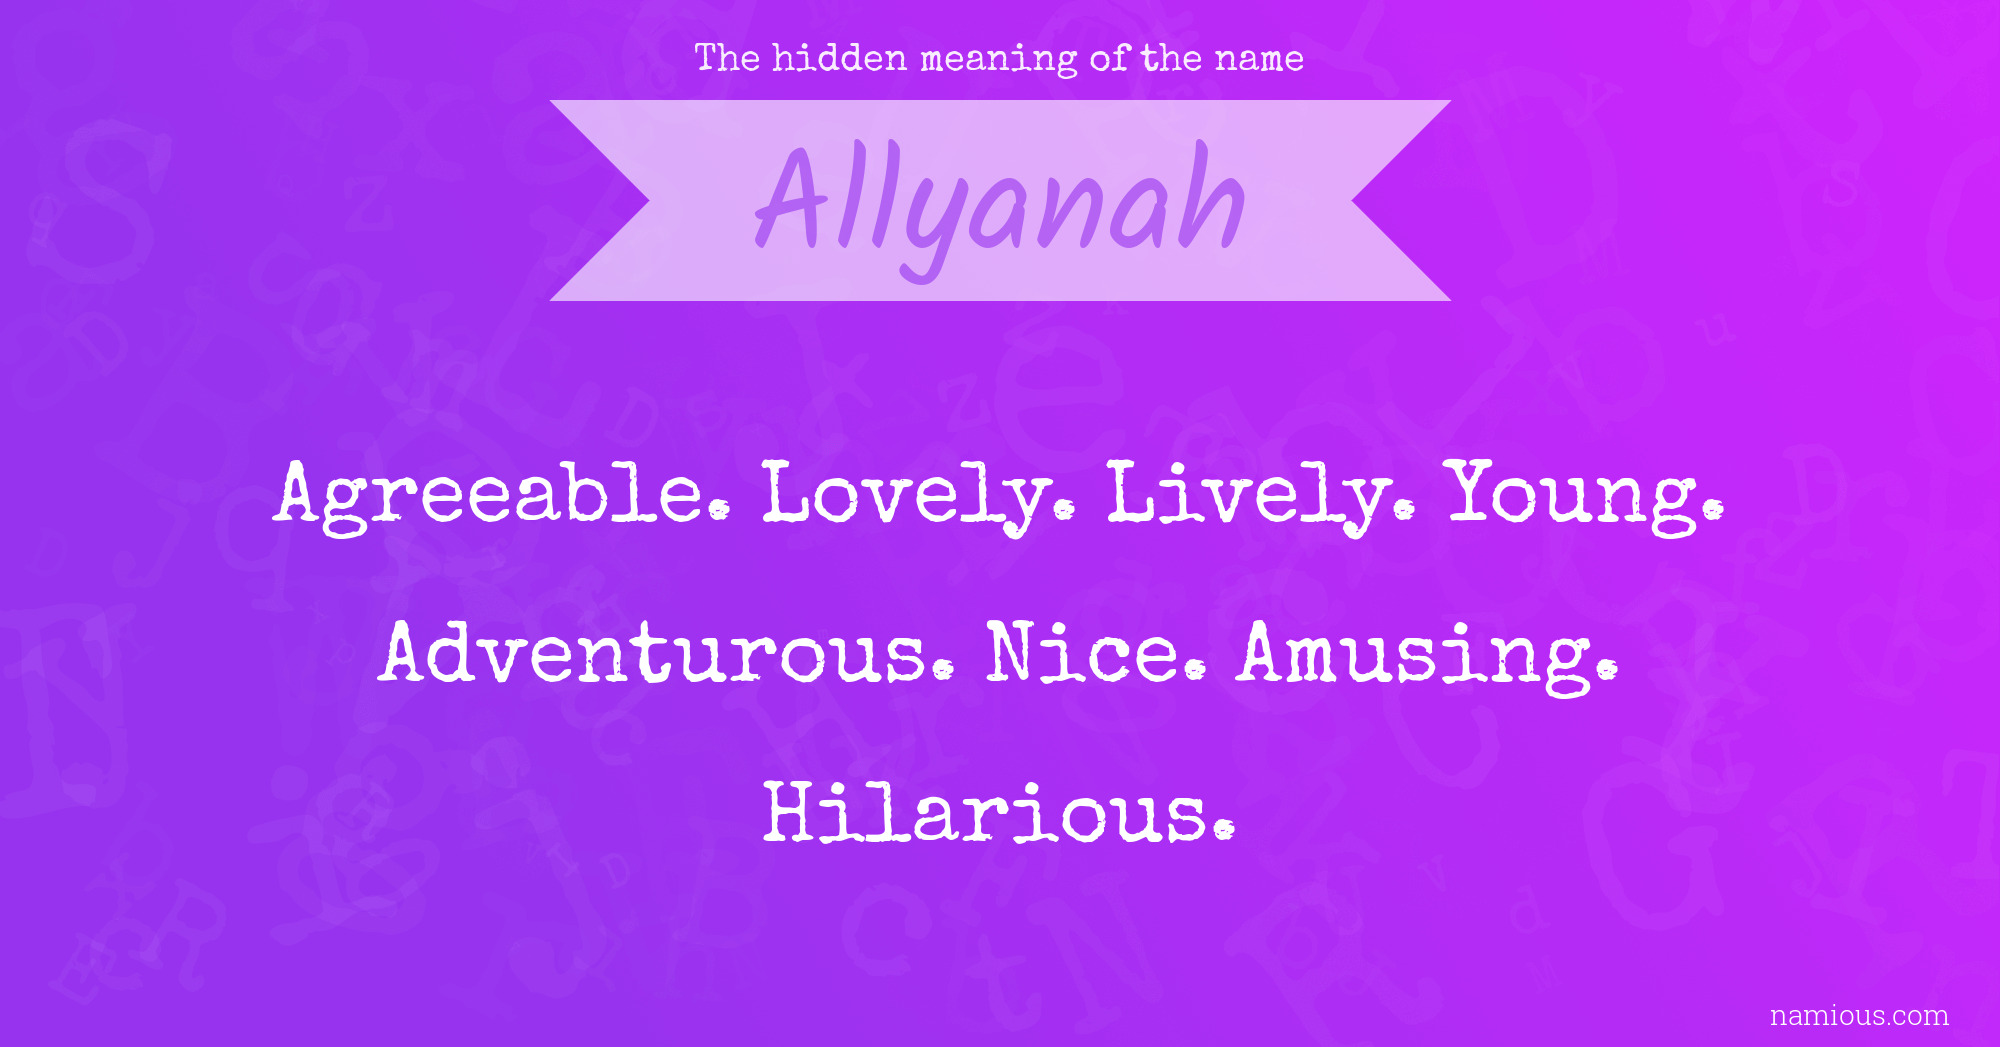 The hidden meaning of the name Allyanah